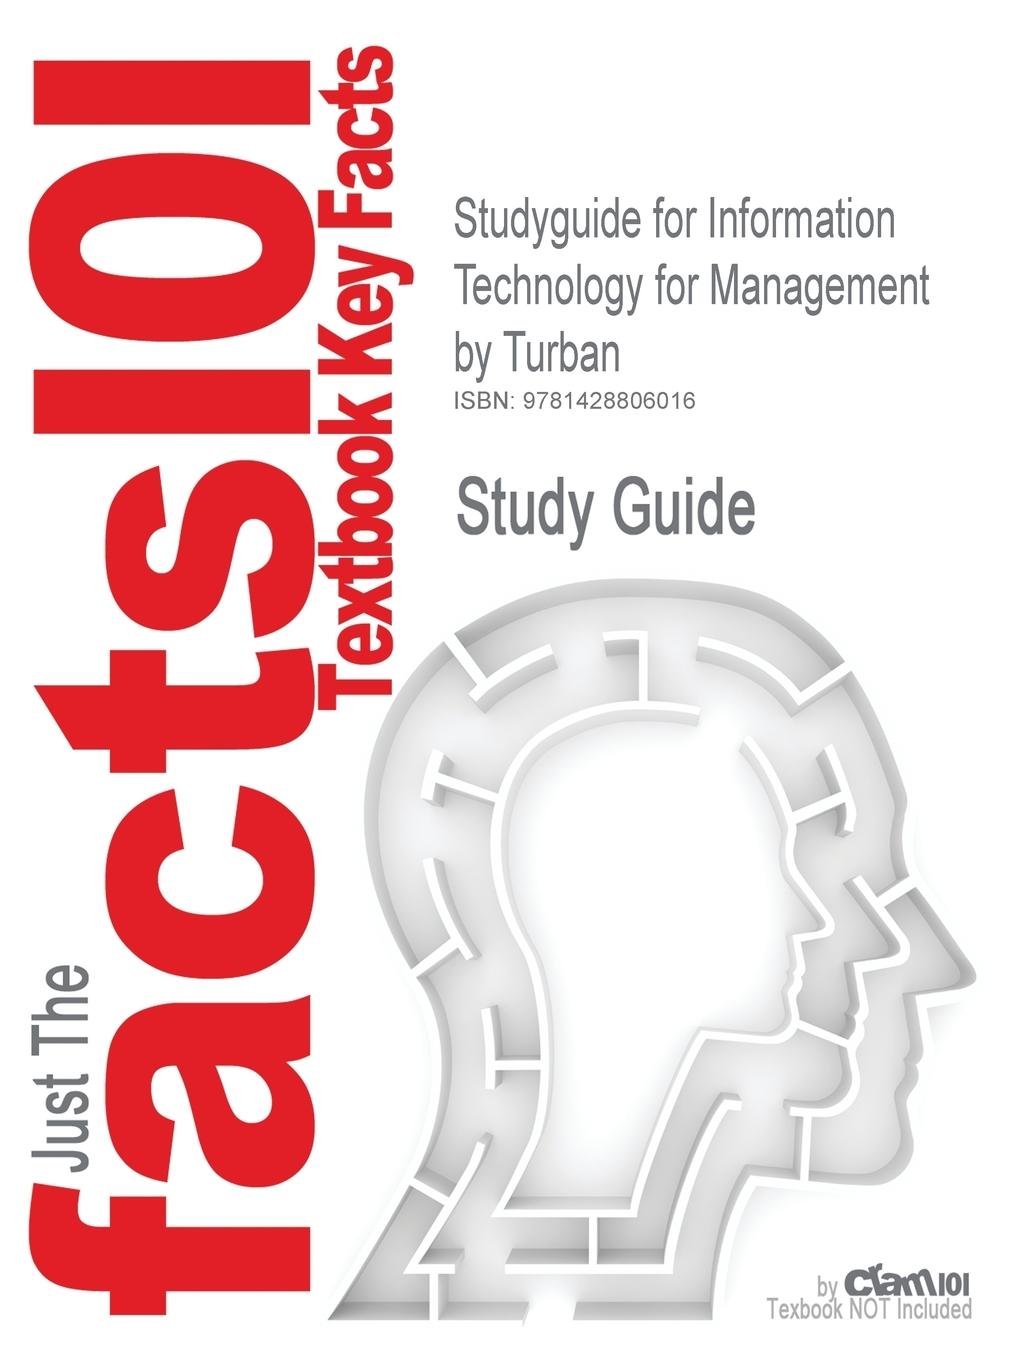 Studyguide for Information Technology for Management by Turban, ISBN 9780471400752 - Turban, McLean And Wetherbe|Cram101 Textbook Reviews